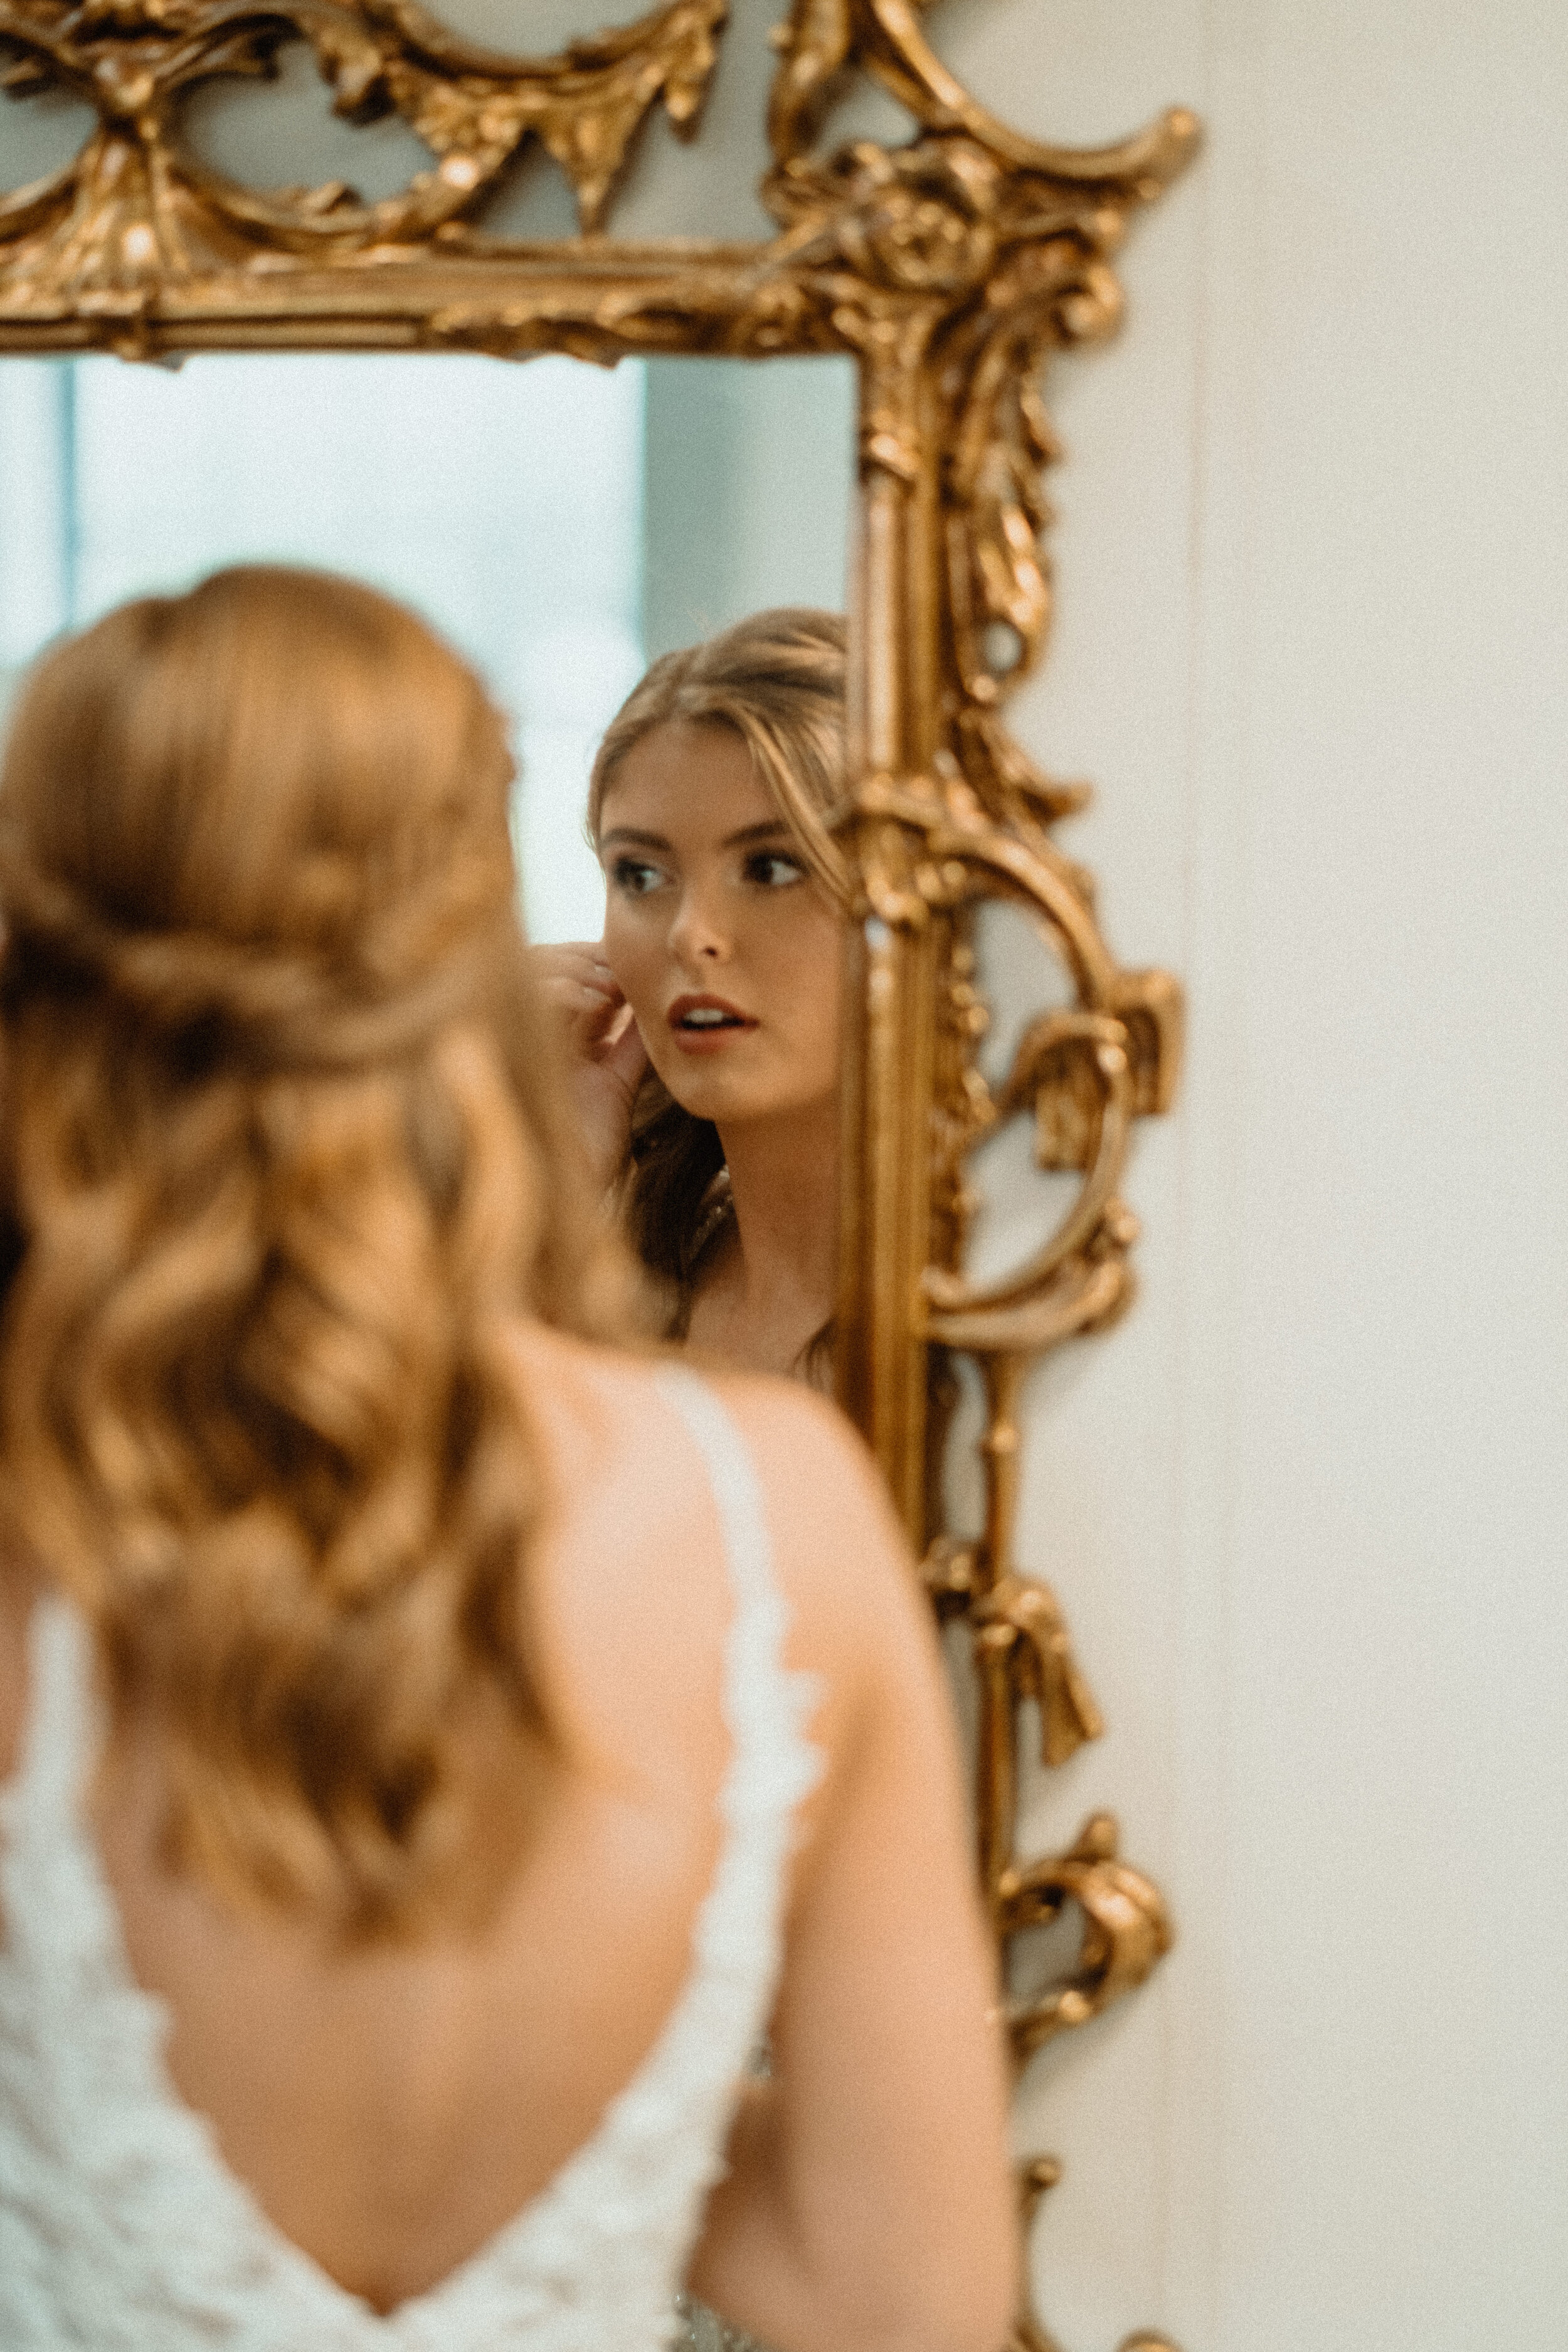 Bride getting ready in mirror Maytag event center